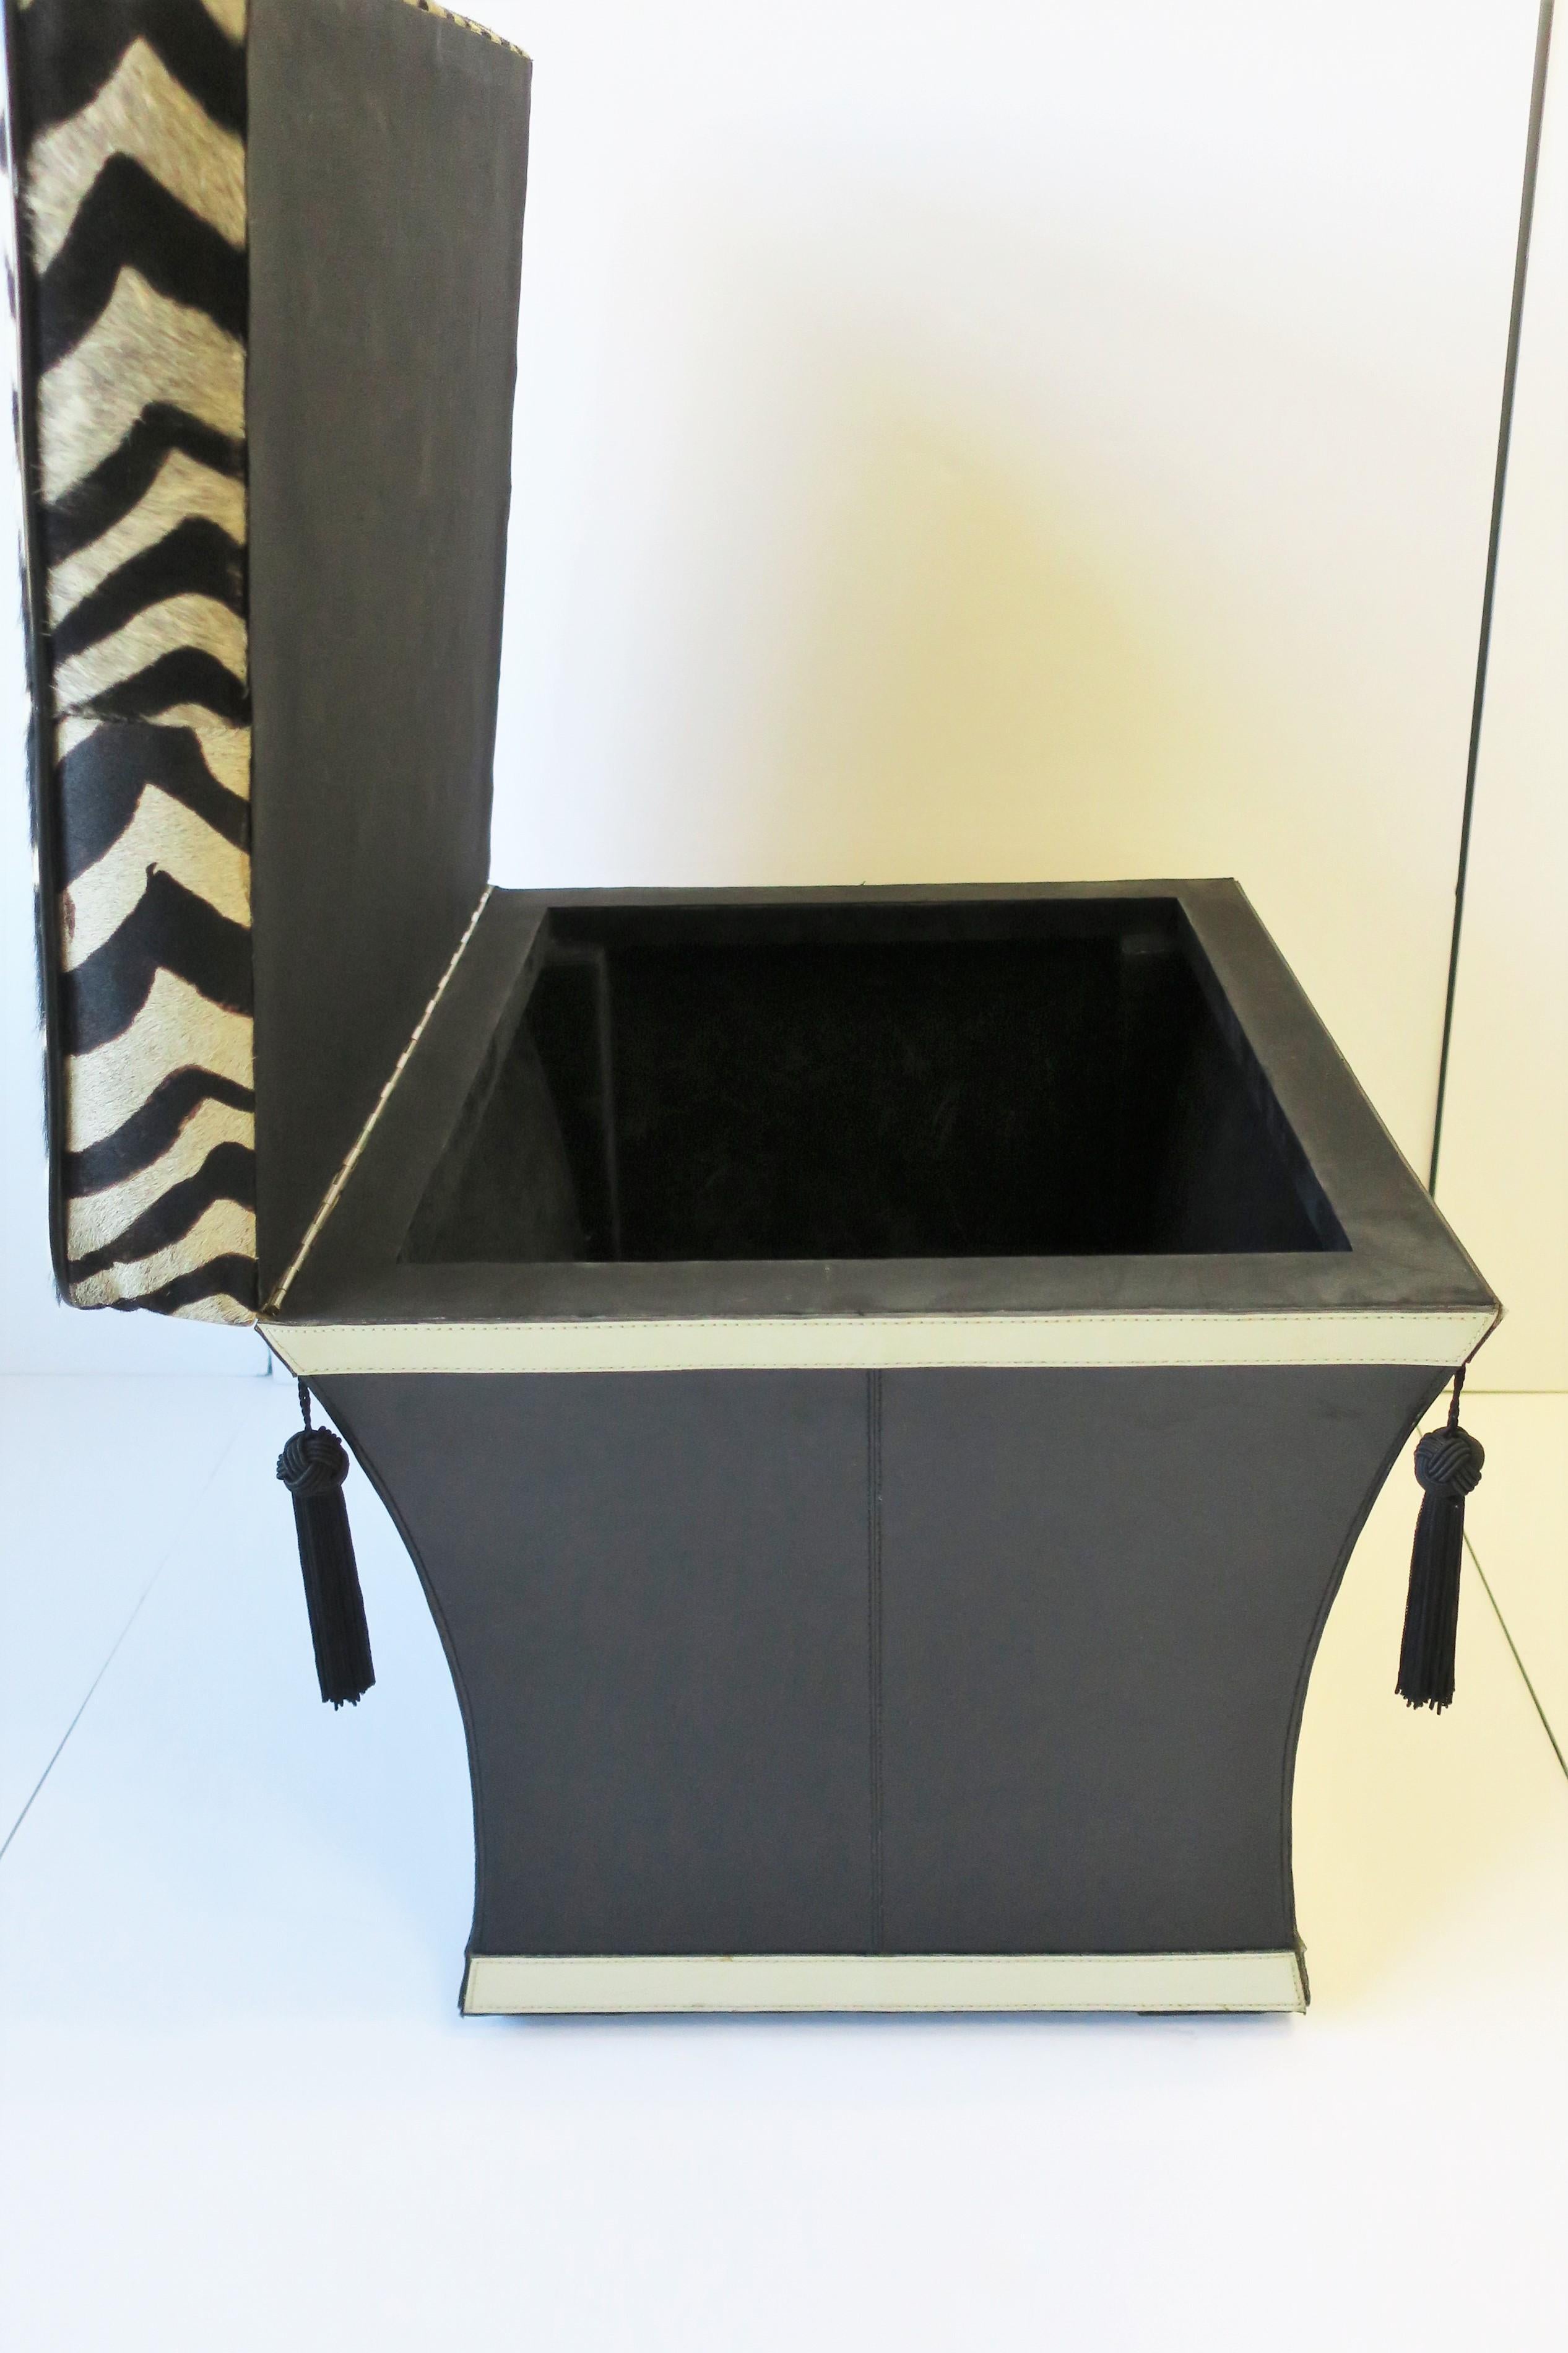 Zebra Hide Bench Stool with Storage Trunk and Tassels, circa 1980s 1990s For Sale 4